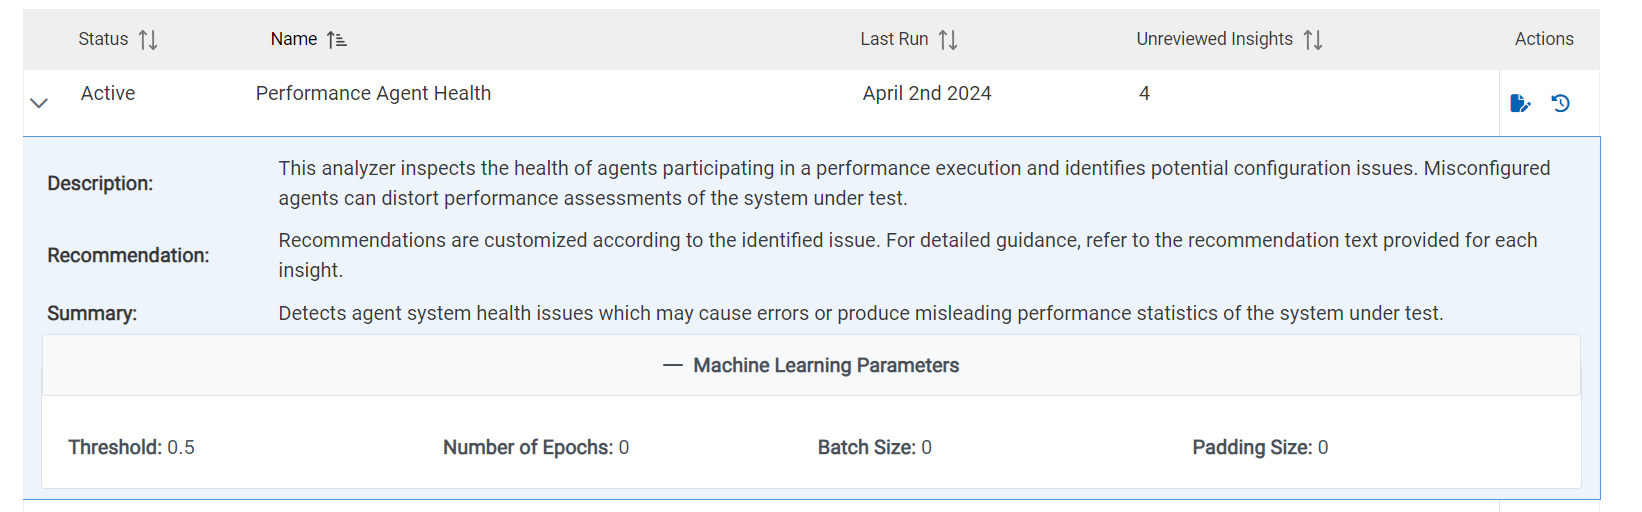 Image of a sample insight detail of the Performance Agent Health parameter.